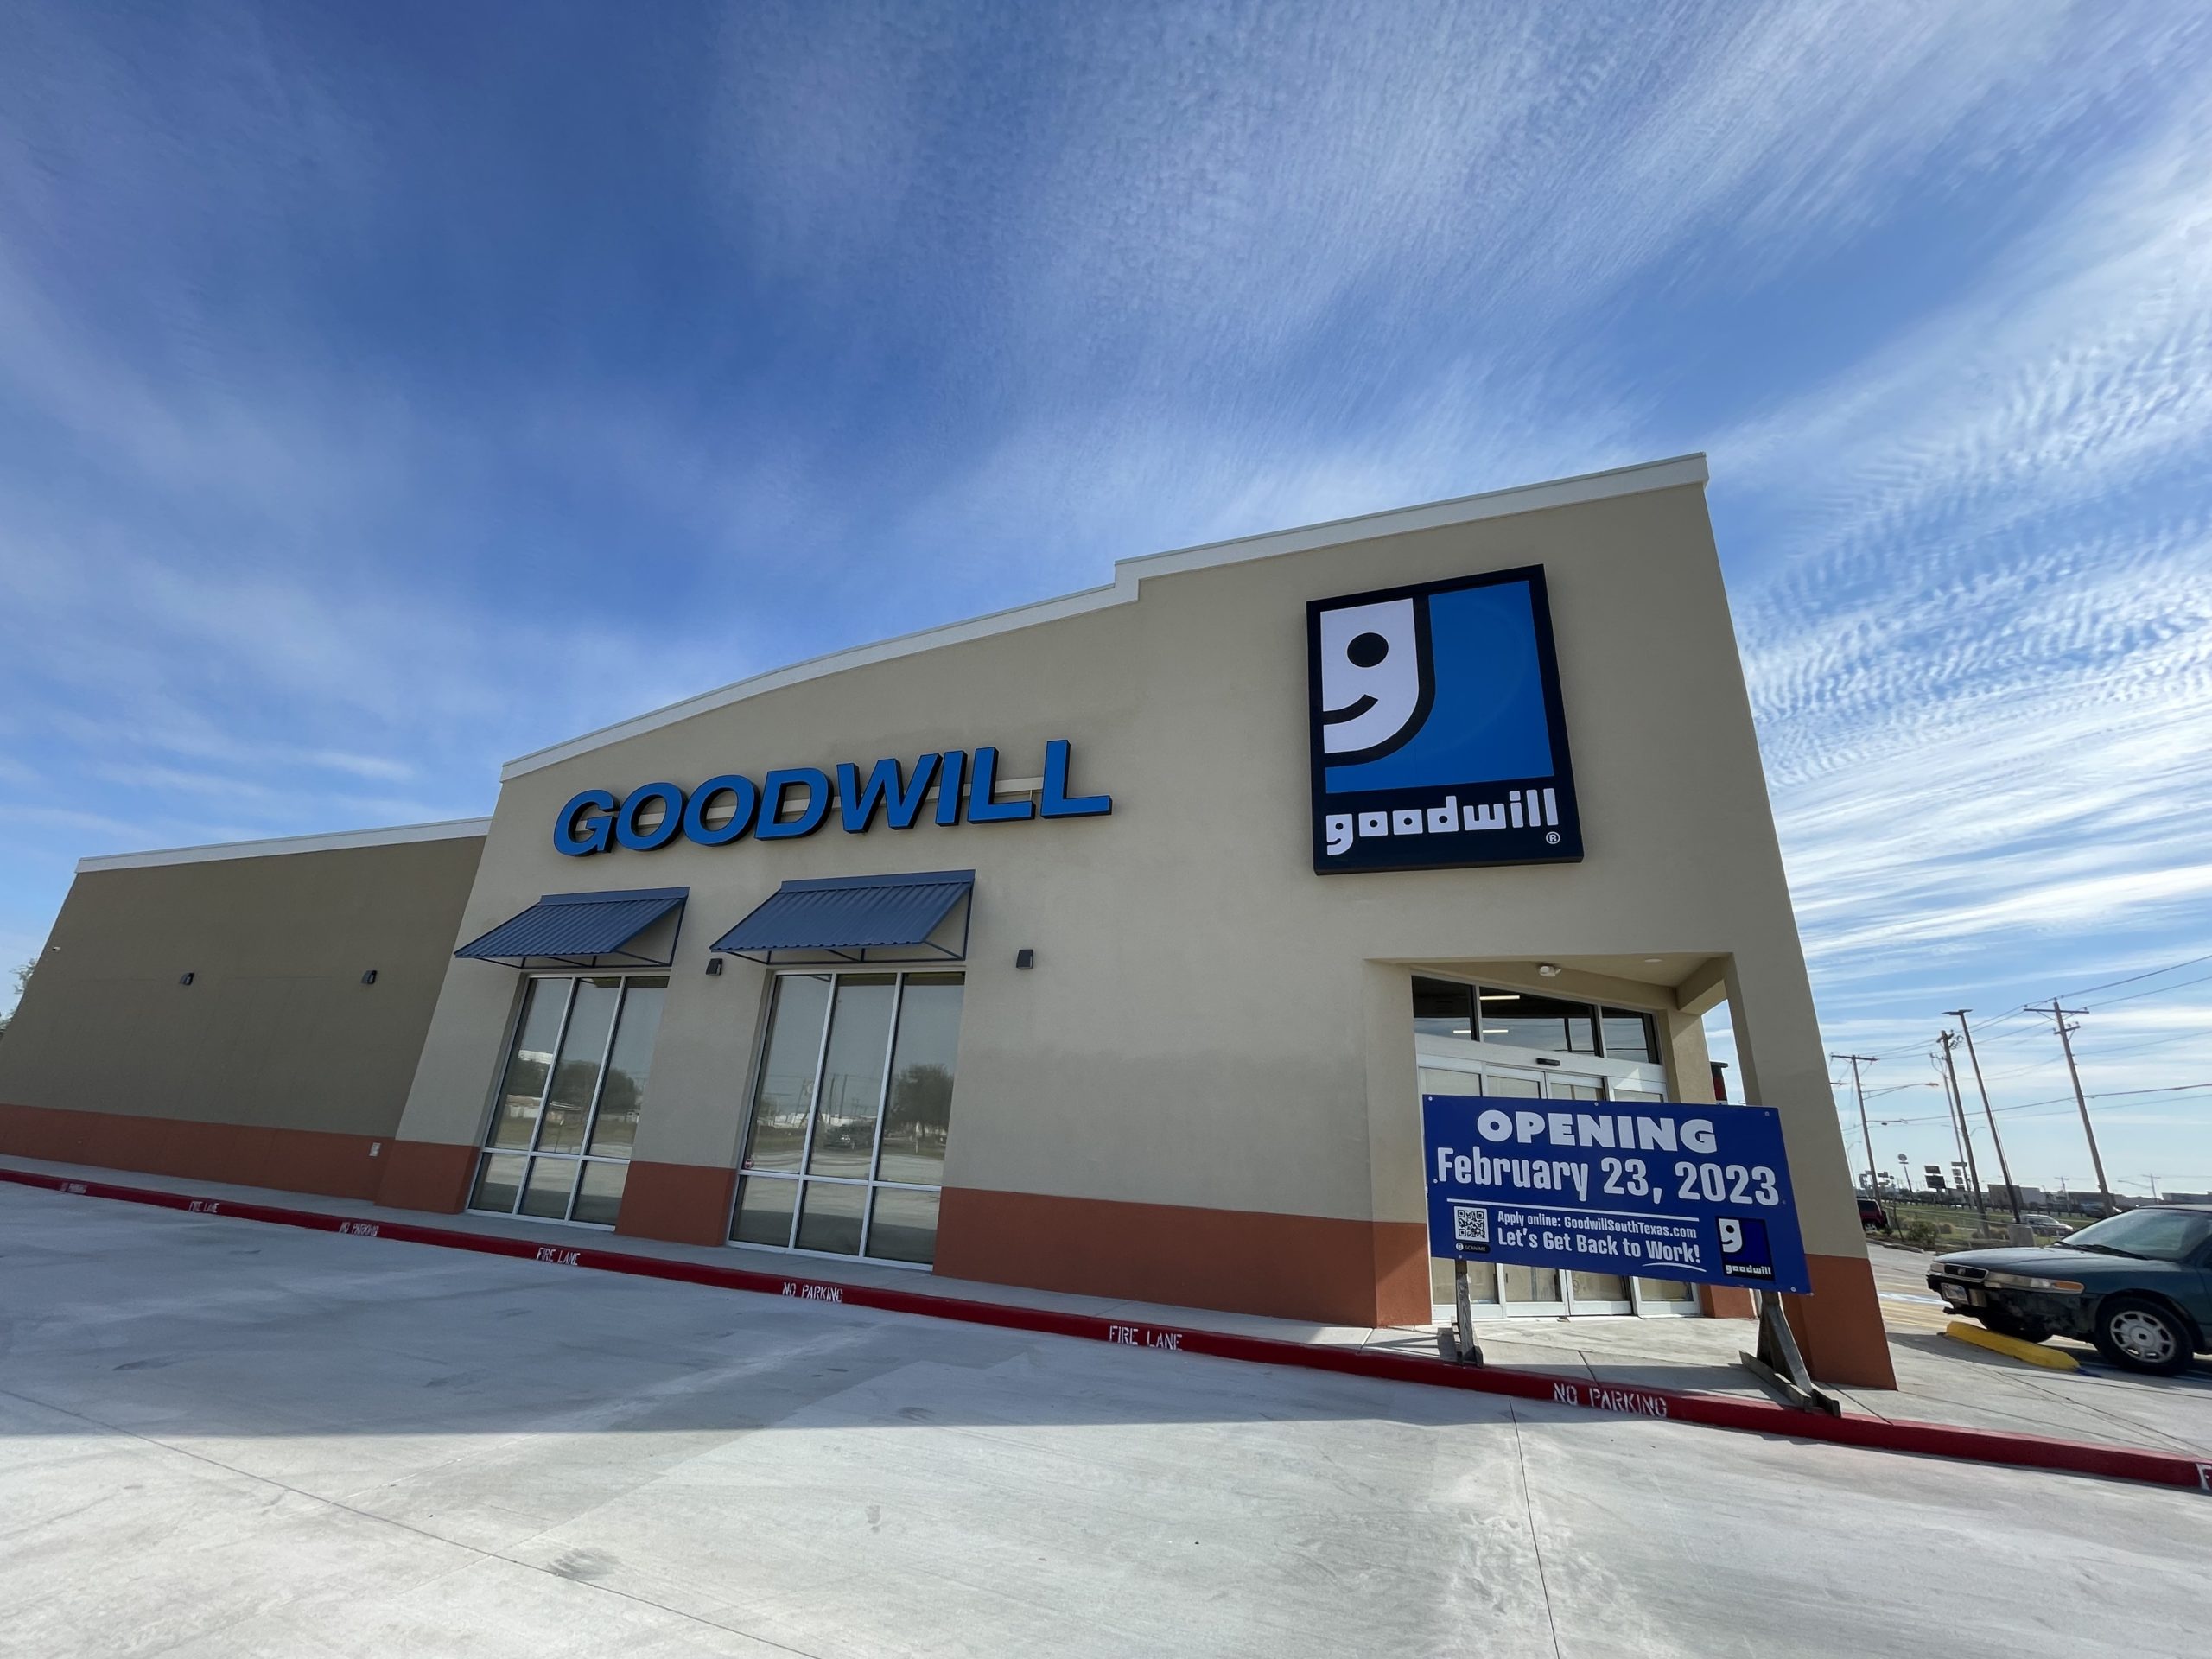 A Goodwill South Texas Storefront